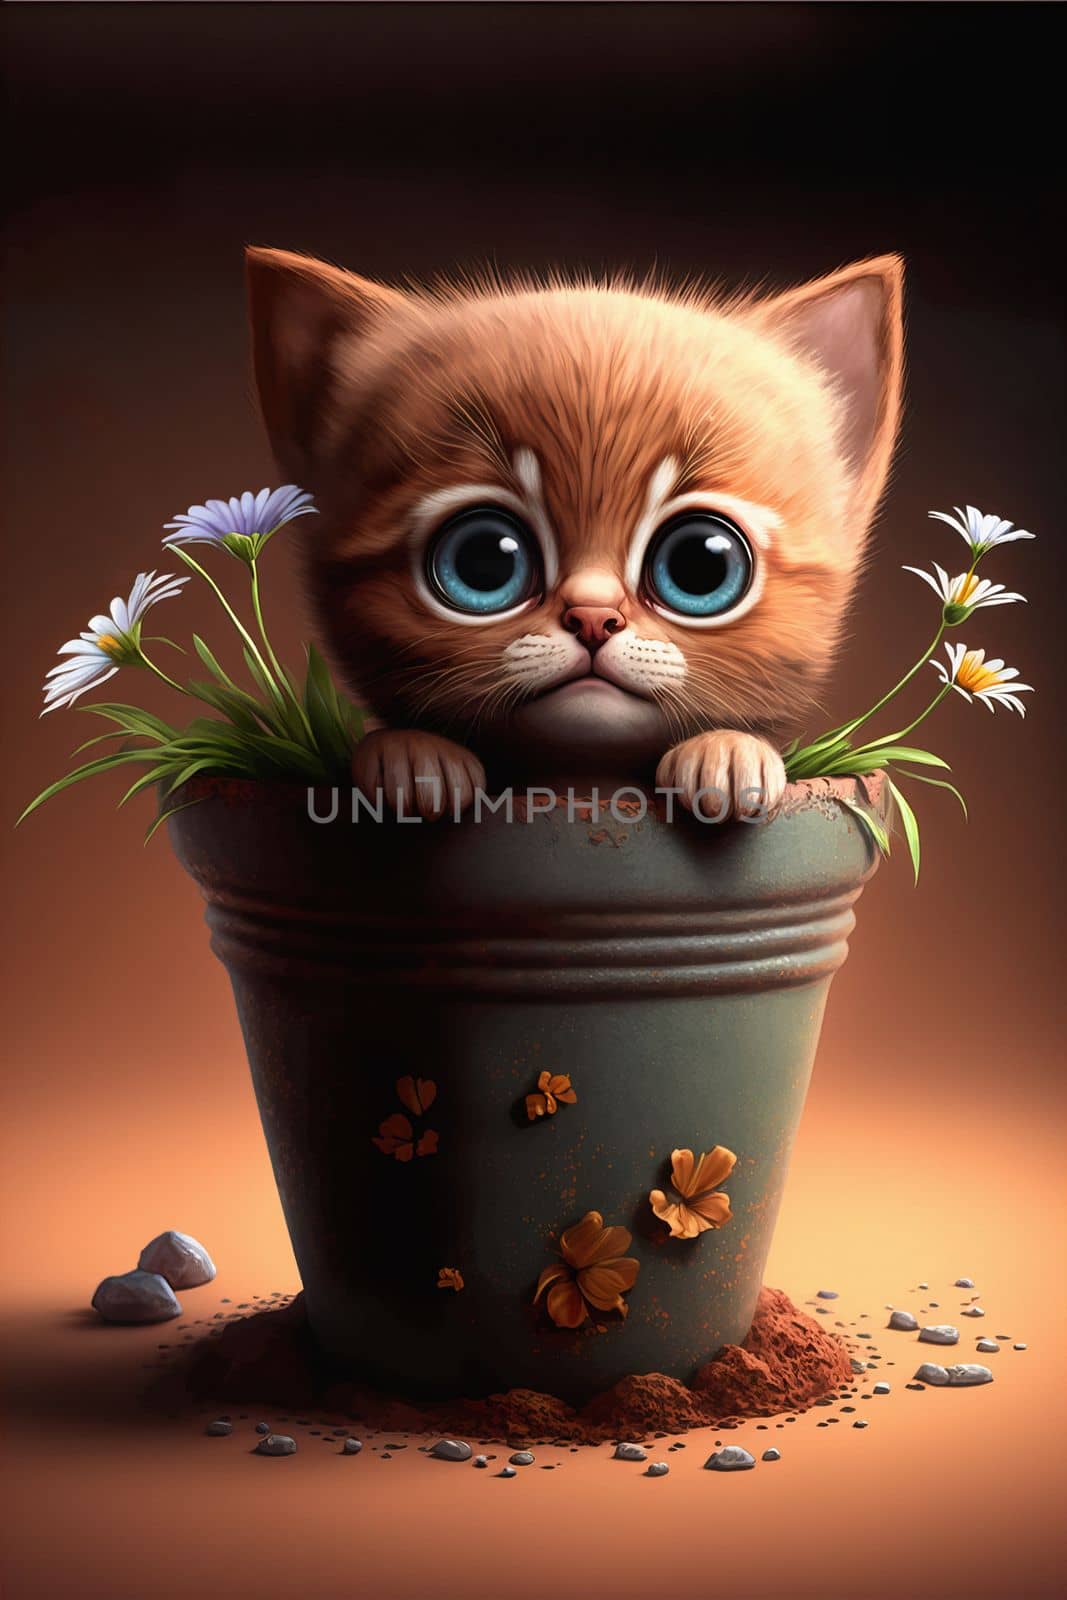 Cute baby kitten coming out of green pot. Illustration of small kitten sitting in a pot with a flowers by igor010